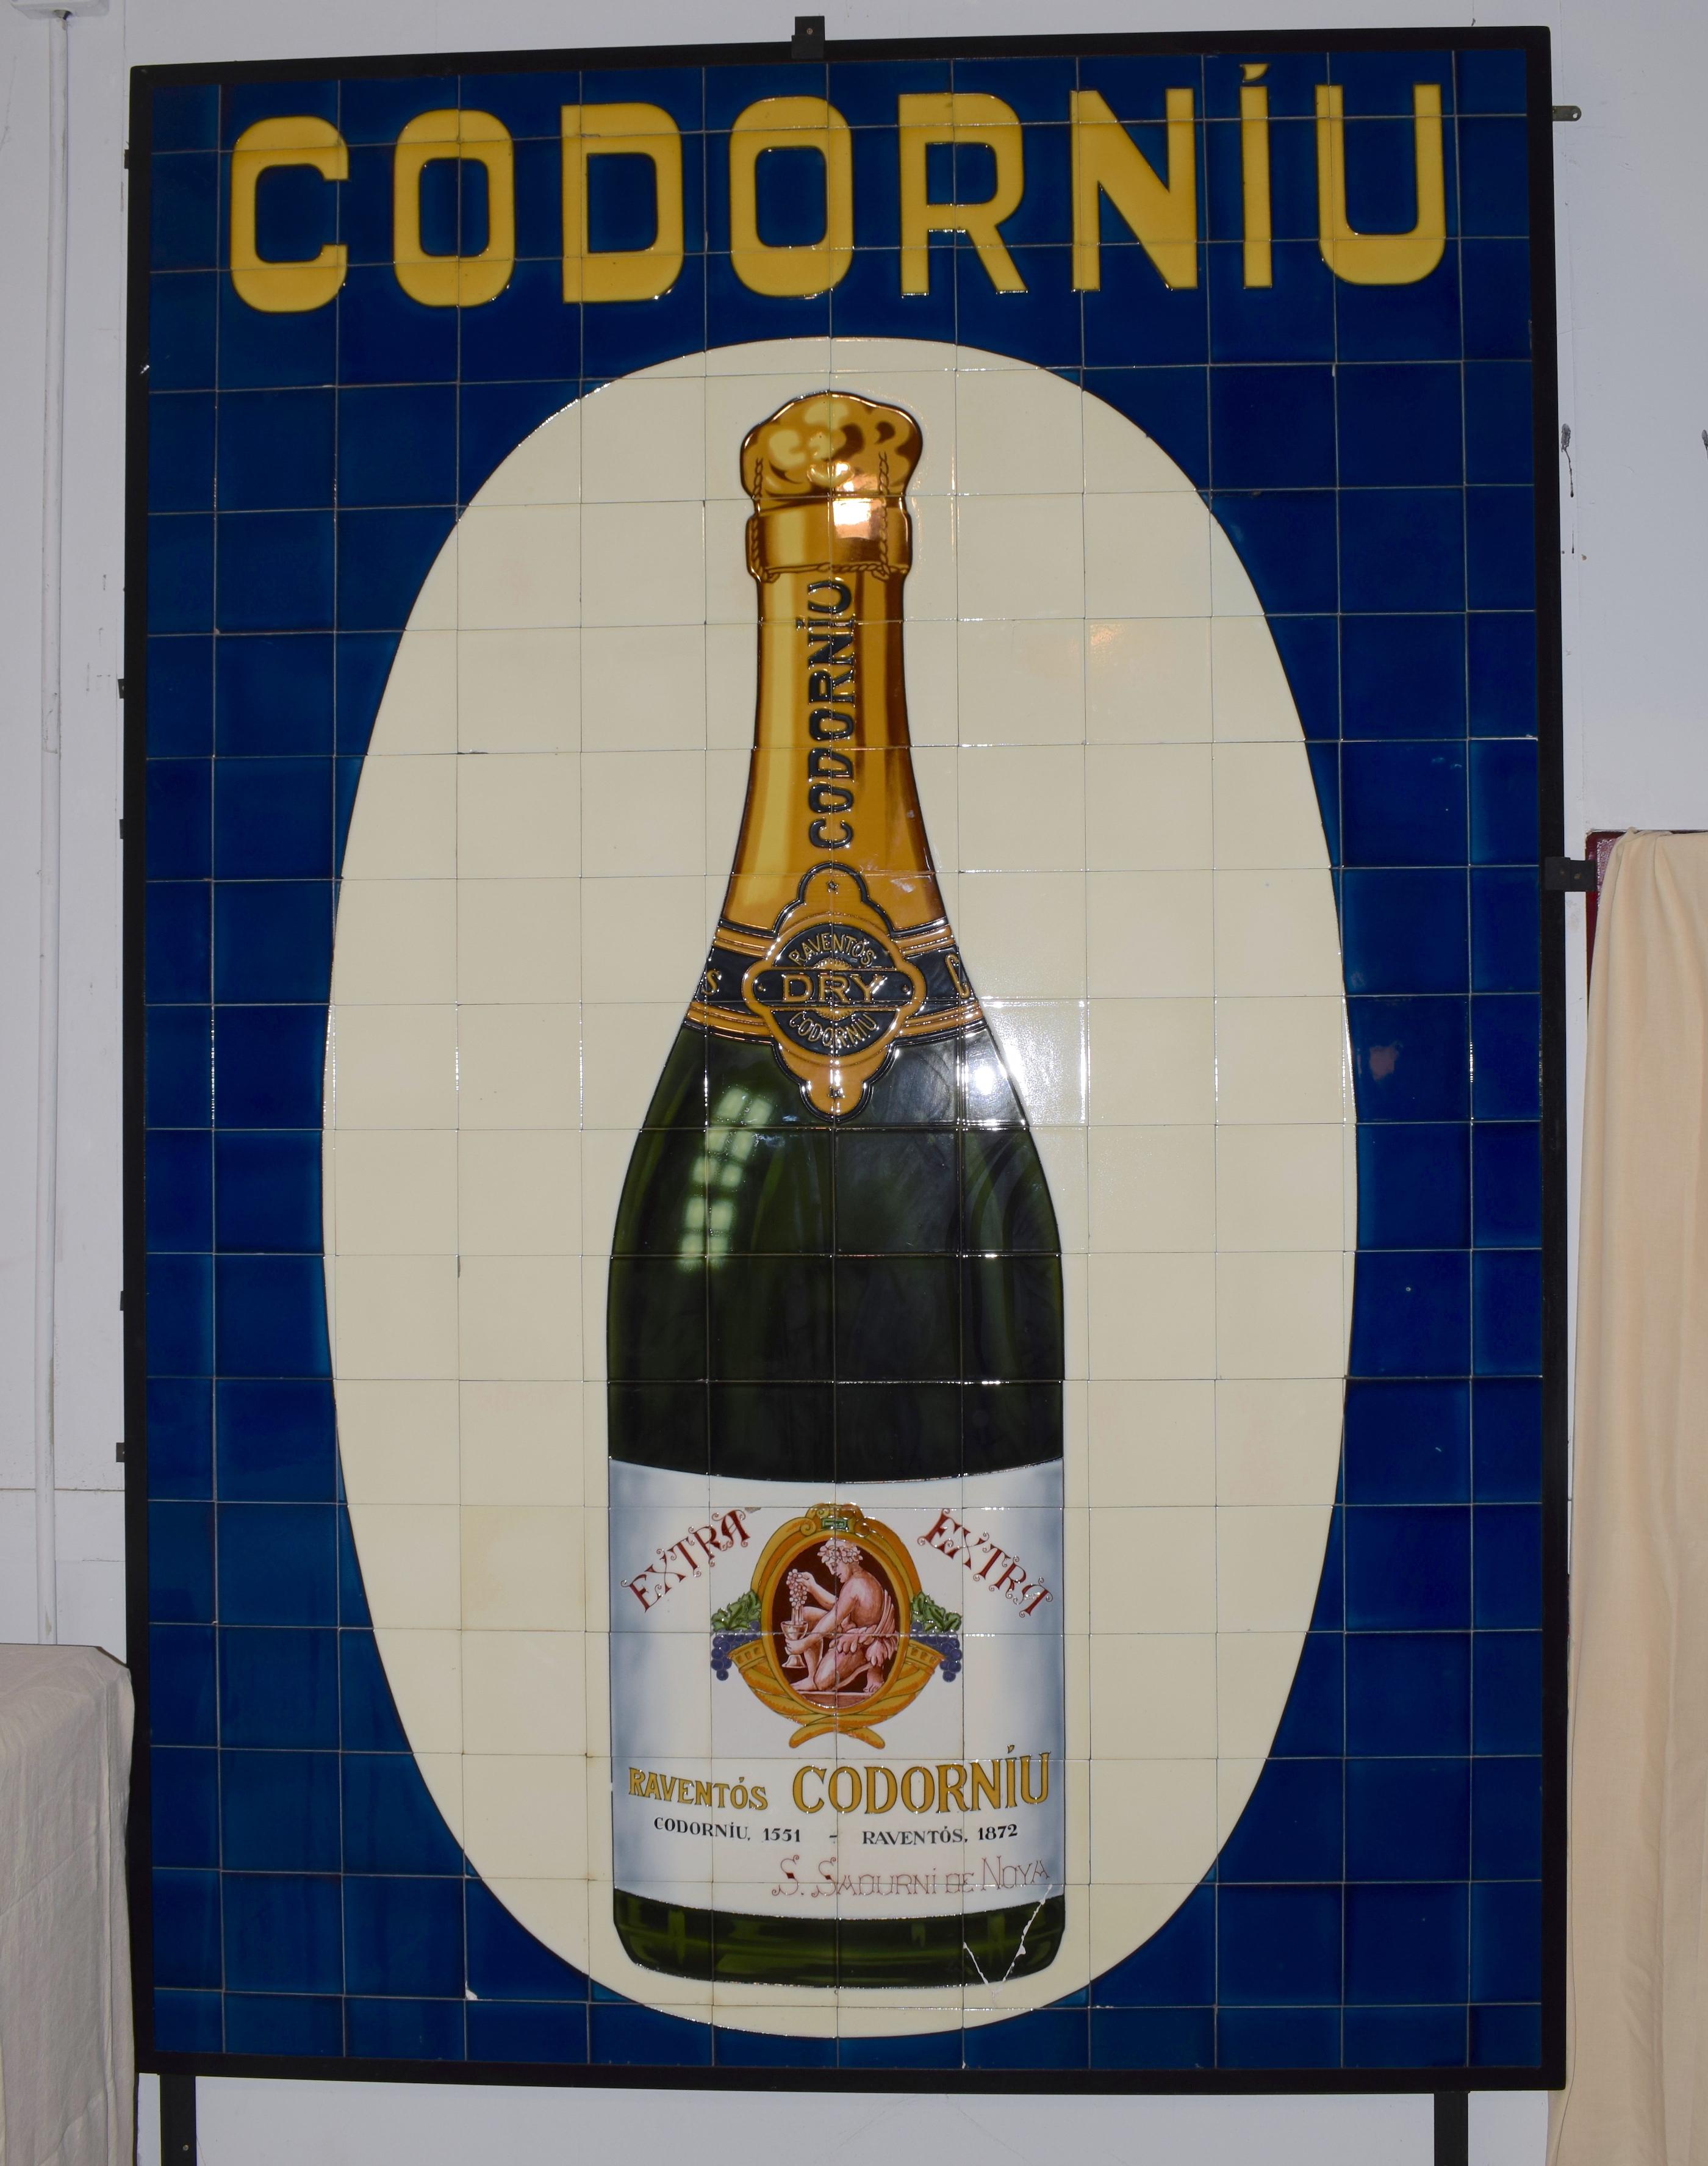 This large advertising panel for Codorniu cava was designed during the 1930s and it clearly symbolises Art Nouveau design. It consists of 20cm by 20cm tiles. This panel was part of an architectural salvage project undertaken by ourselves and clearly